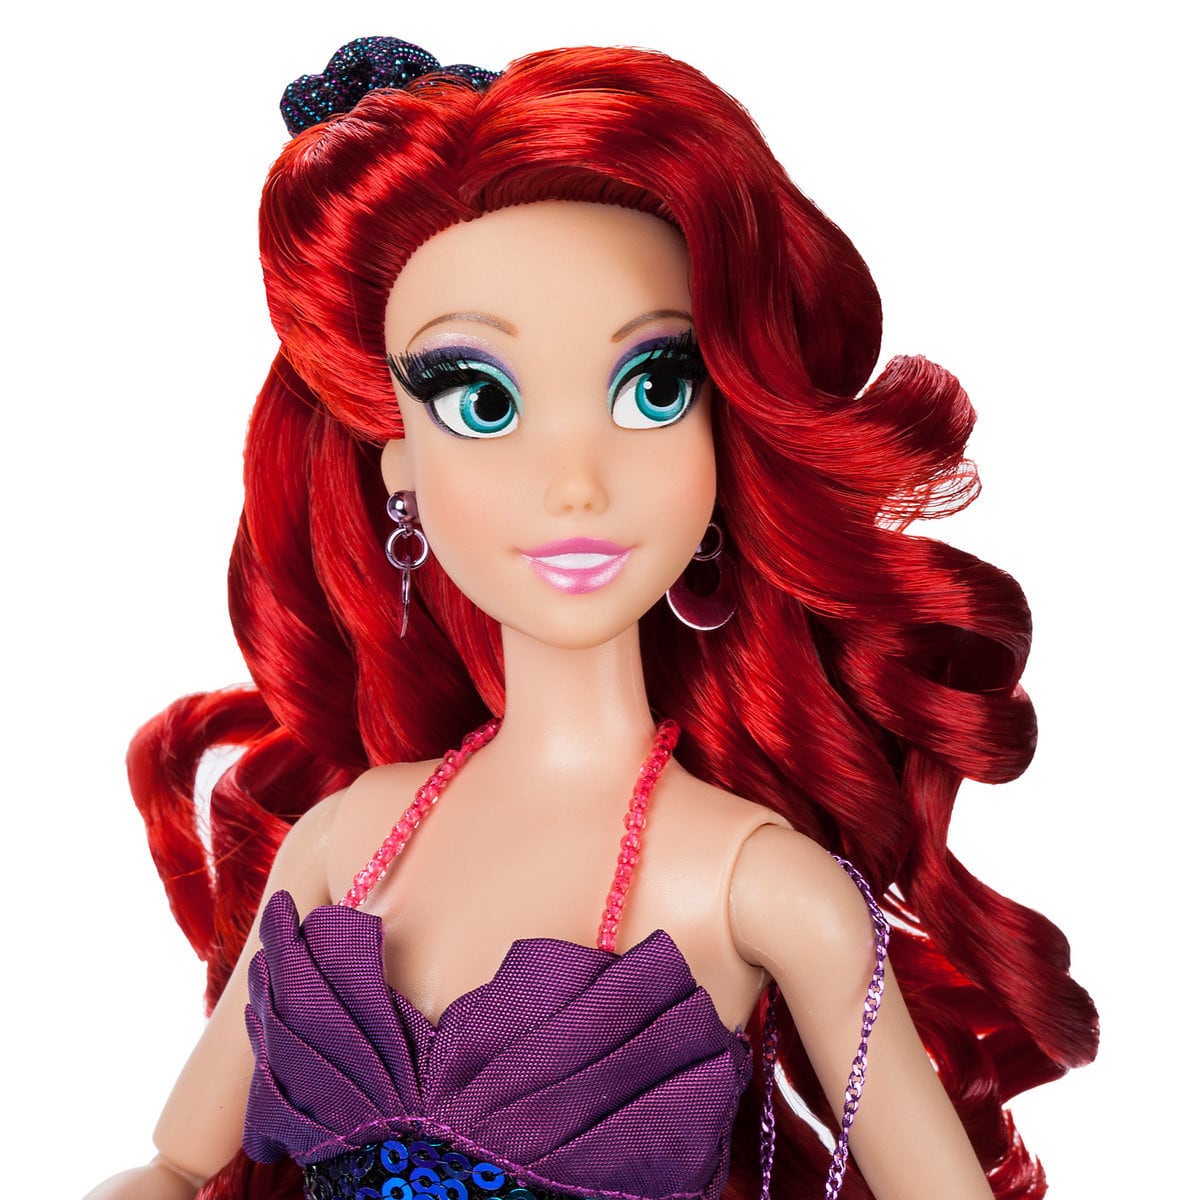 ariel collector doll